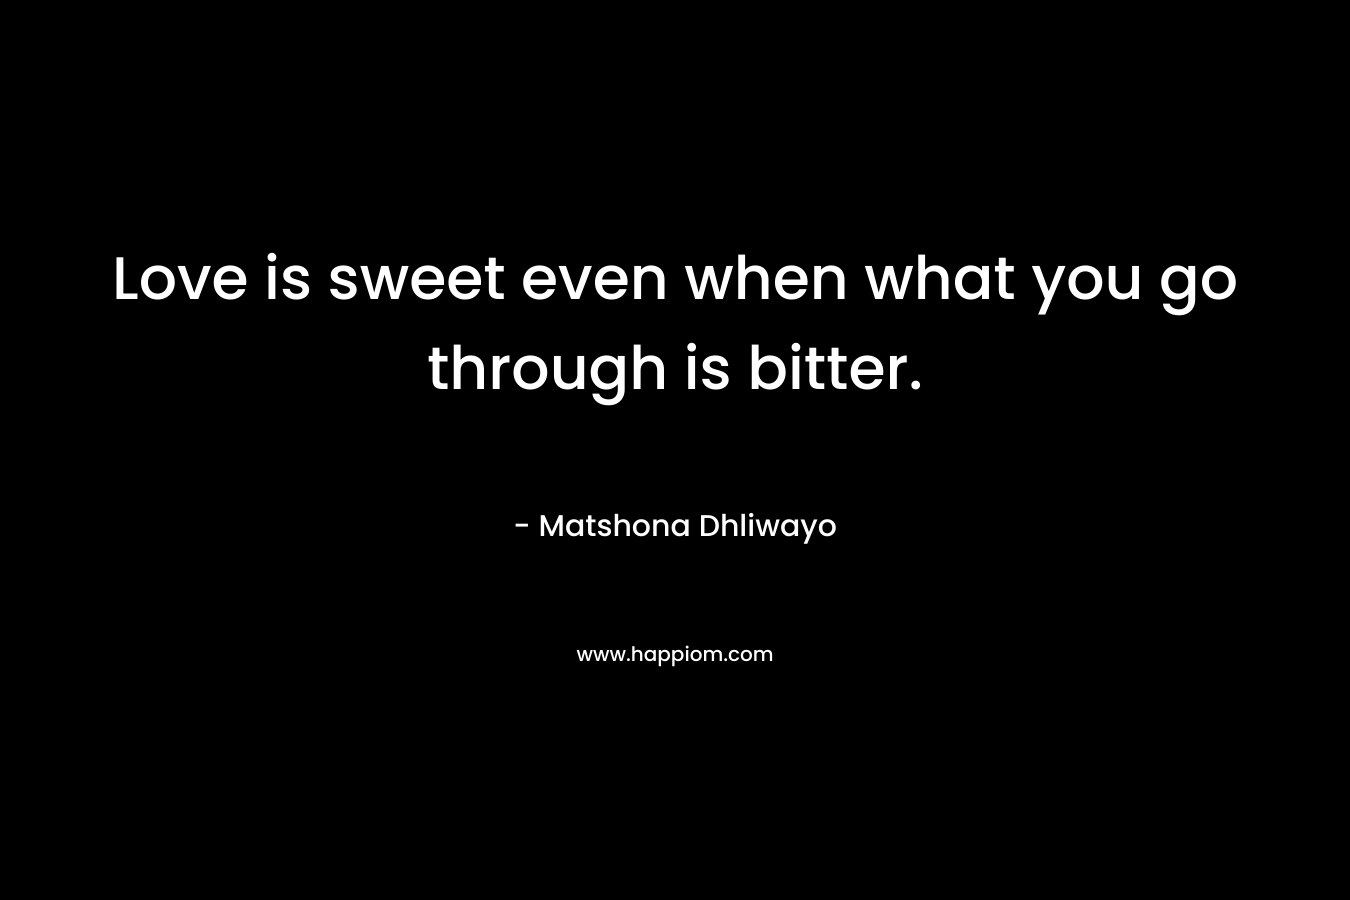 Love is sweet even when what you go through is bitter. – Matshona Dhliwayo